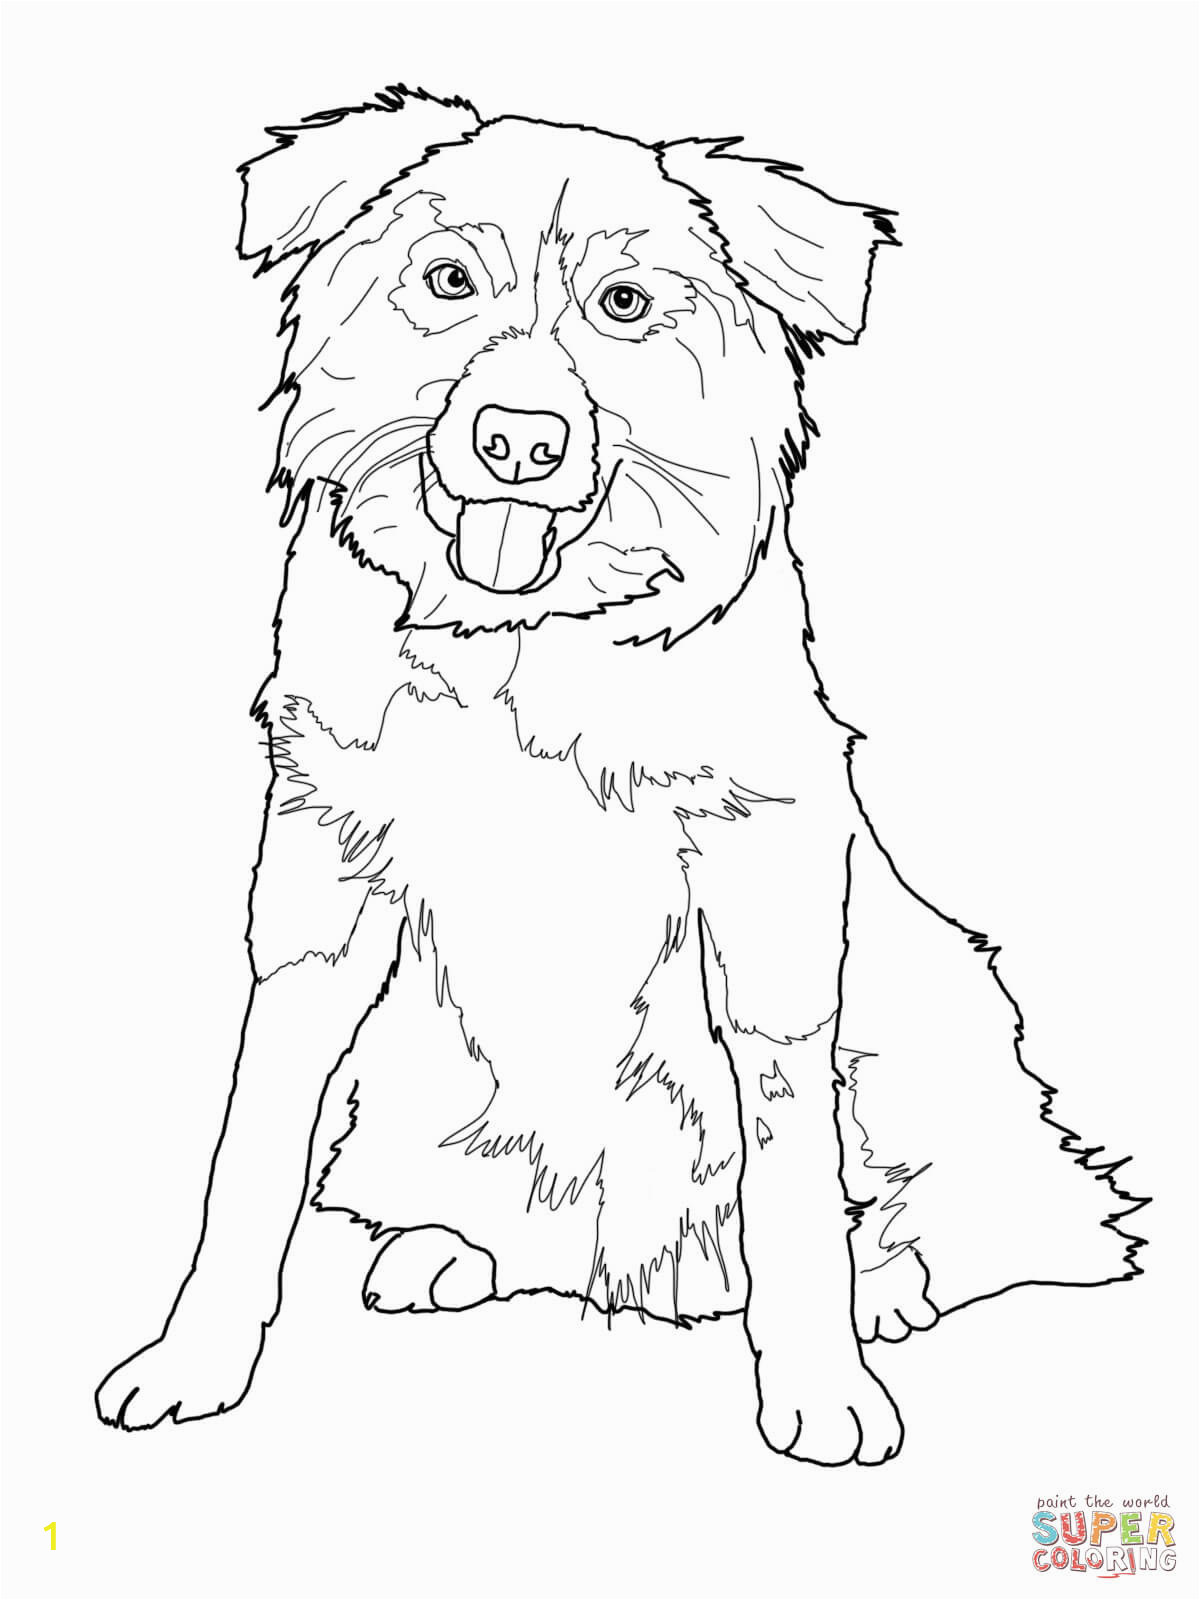 Border Collie Coloring Pages to Print Border Collie Coloring Page